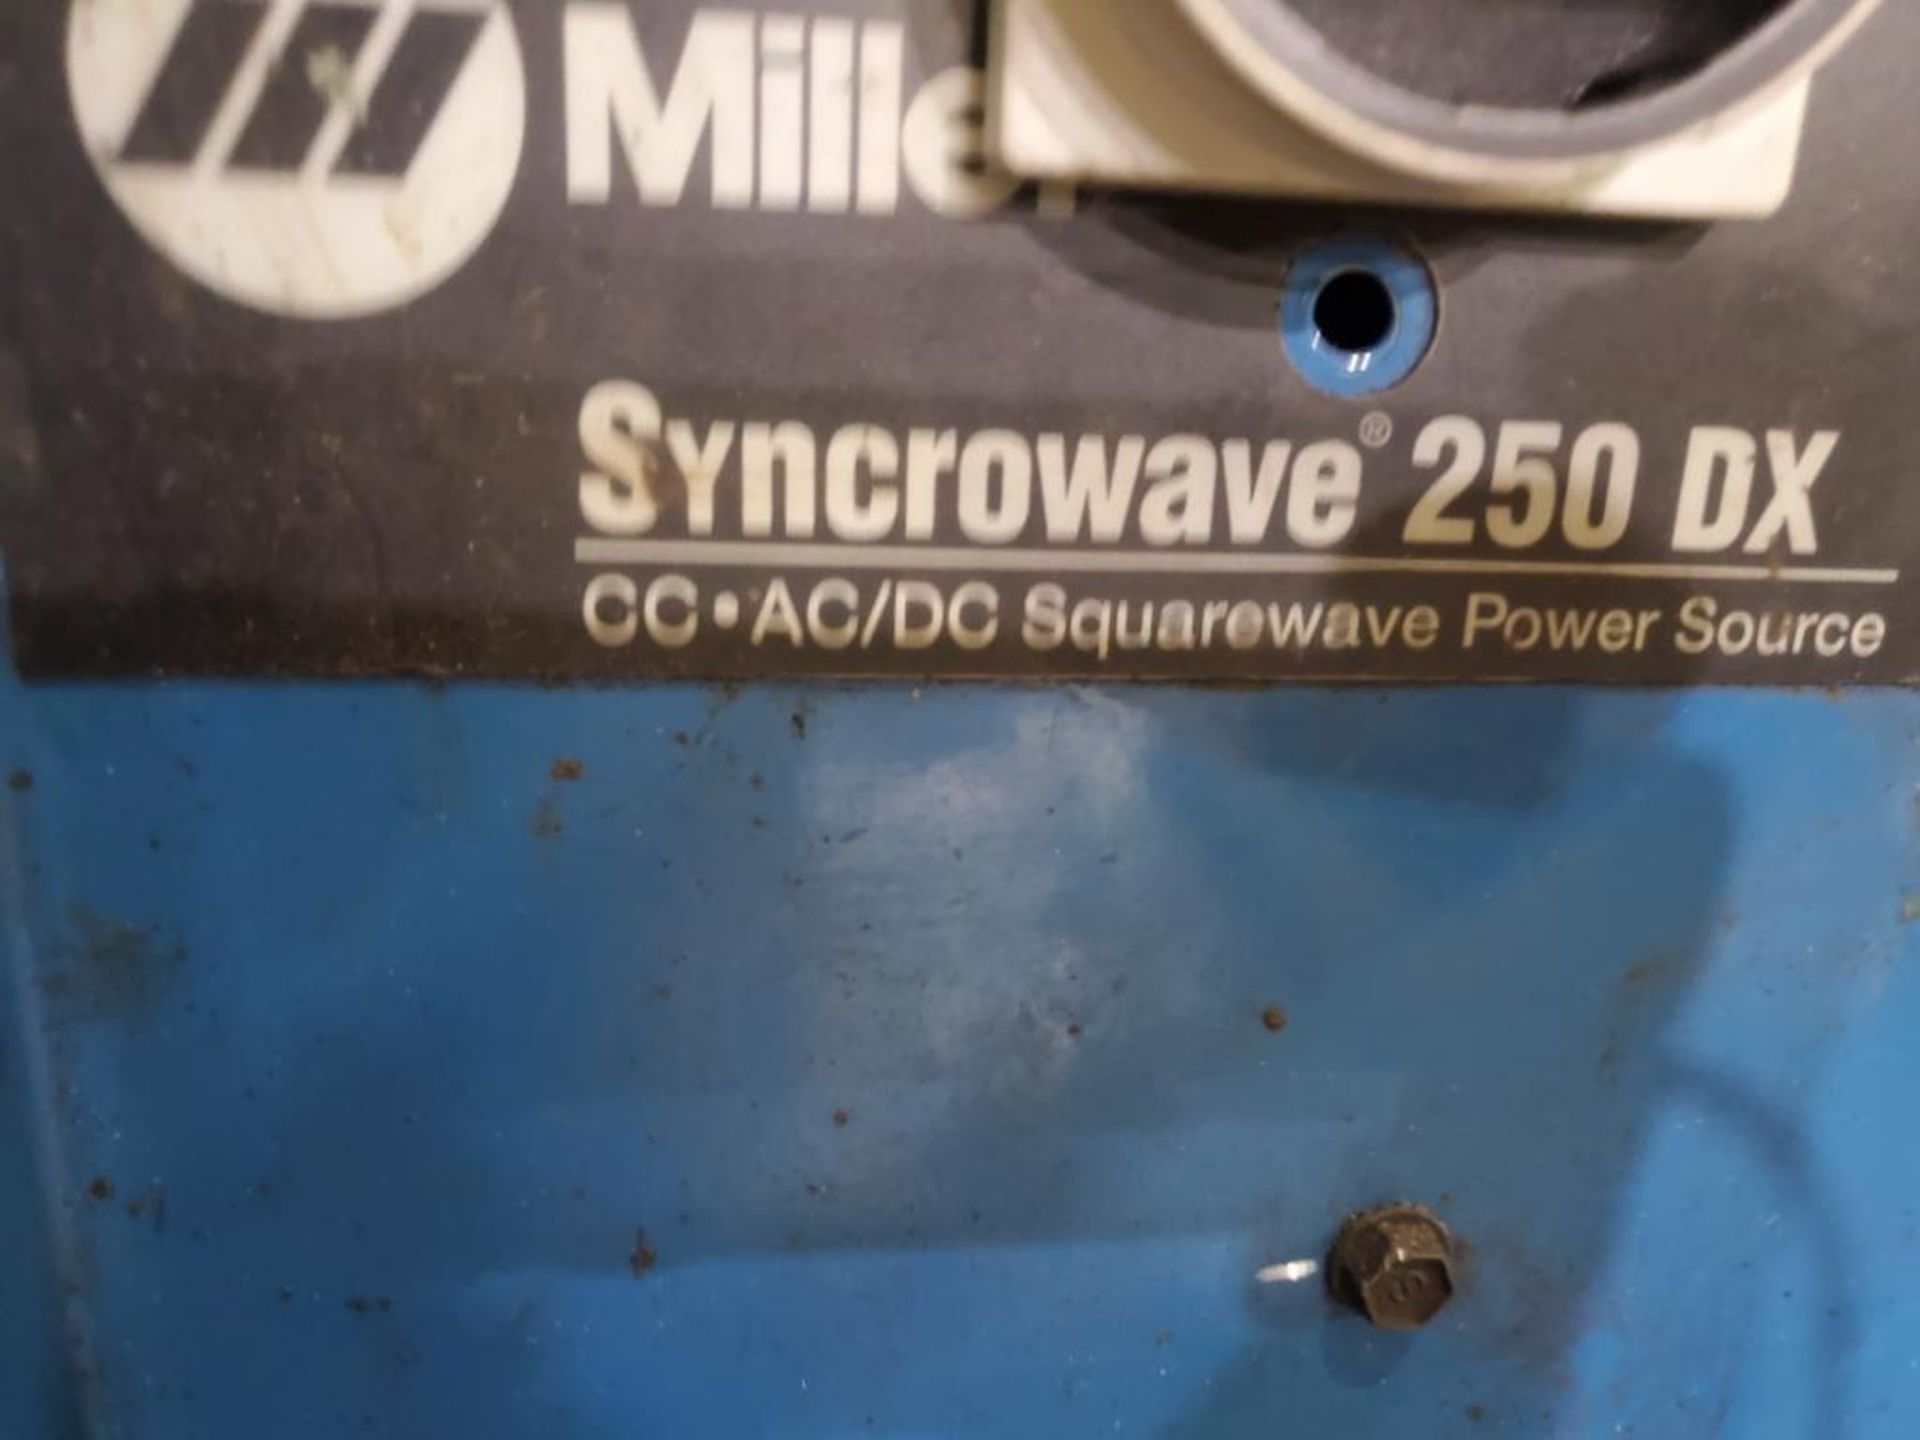 MILLER SYNCROWAVE 250 DX TIG W COOLMATE 3 CHILLER, DRO, ON PORTABLE STEEL FRAME CART. PLEASE NOTE: - Image 4 of 7